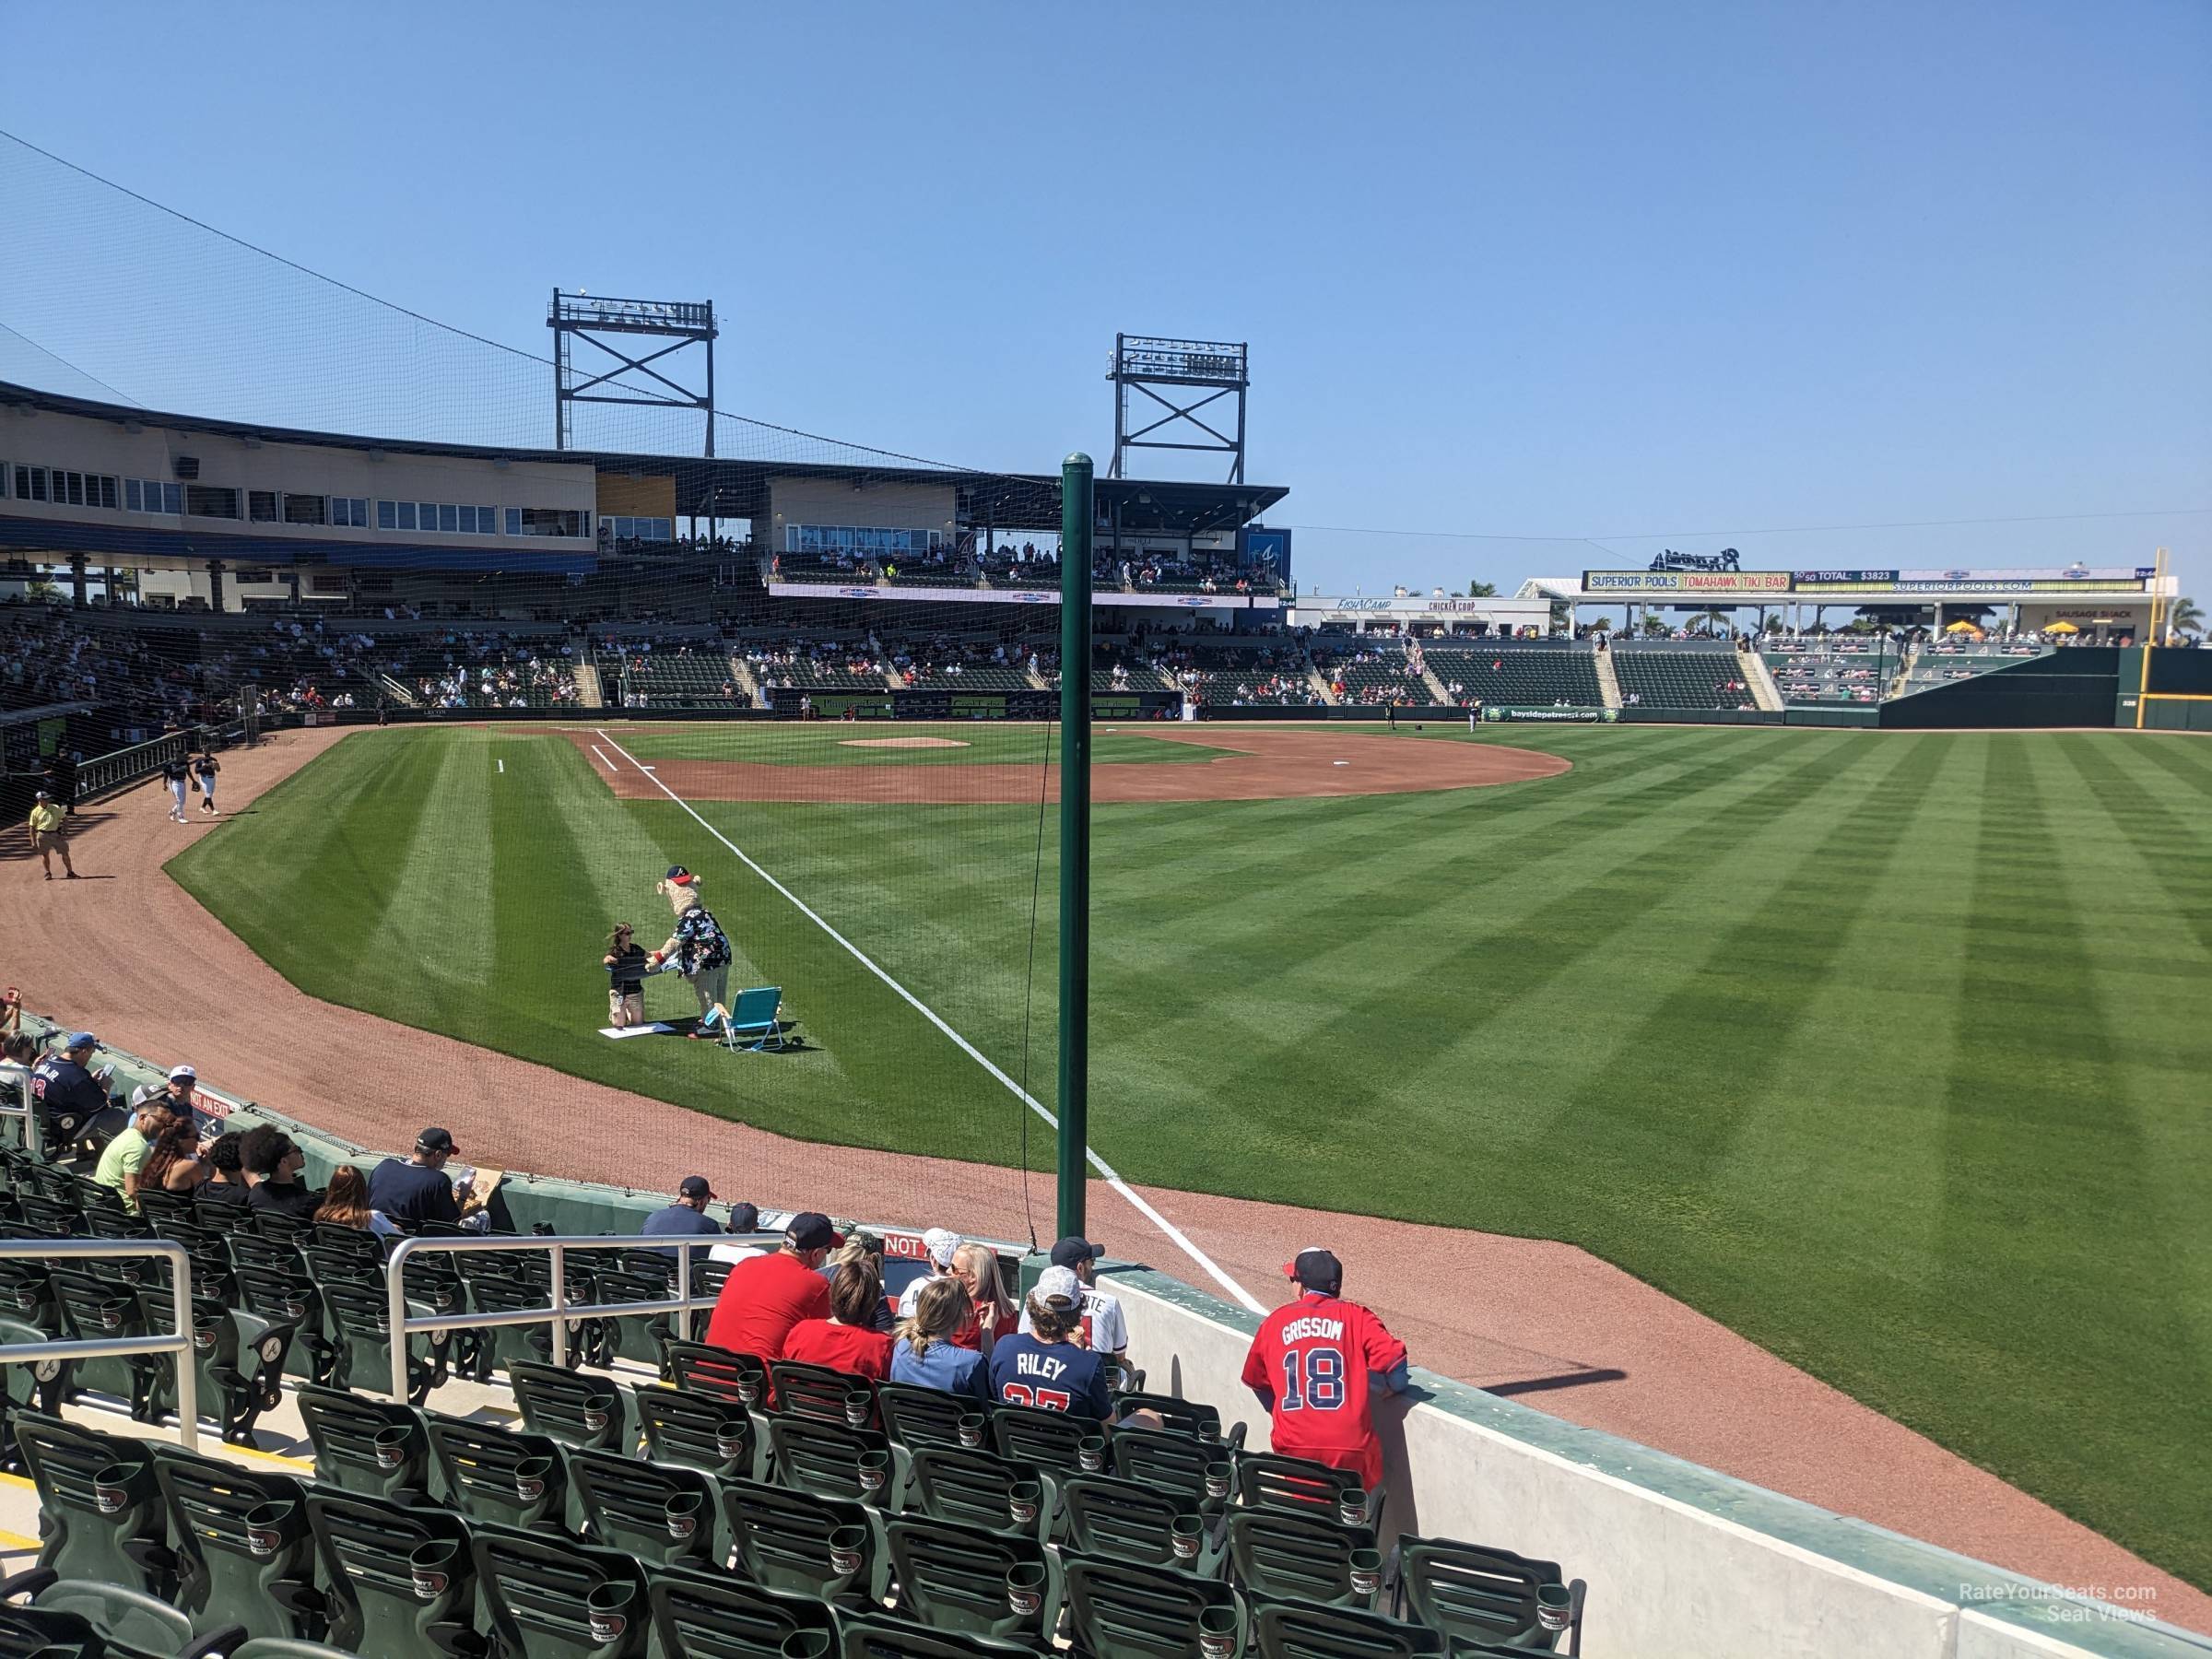 section 101, row 11 seat view  - cooltoday park